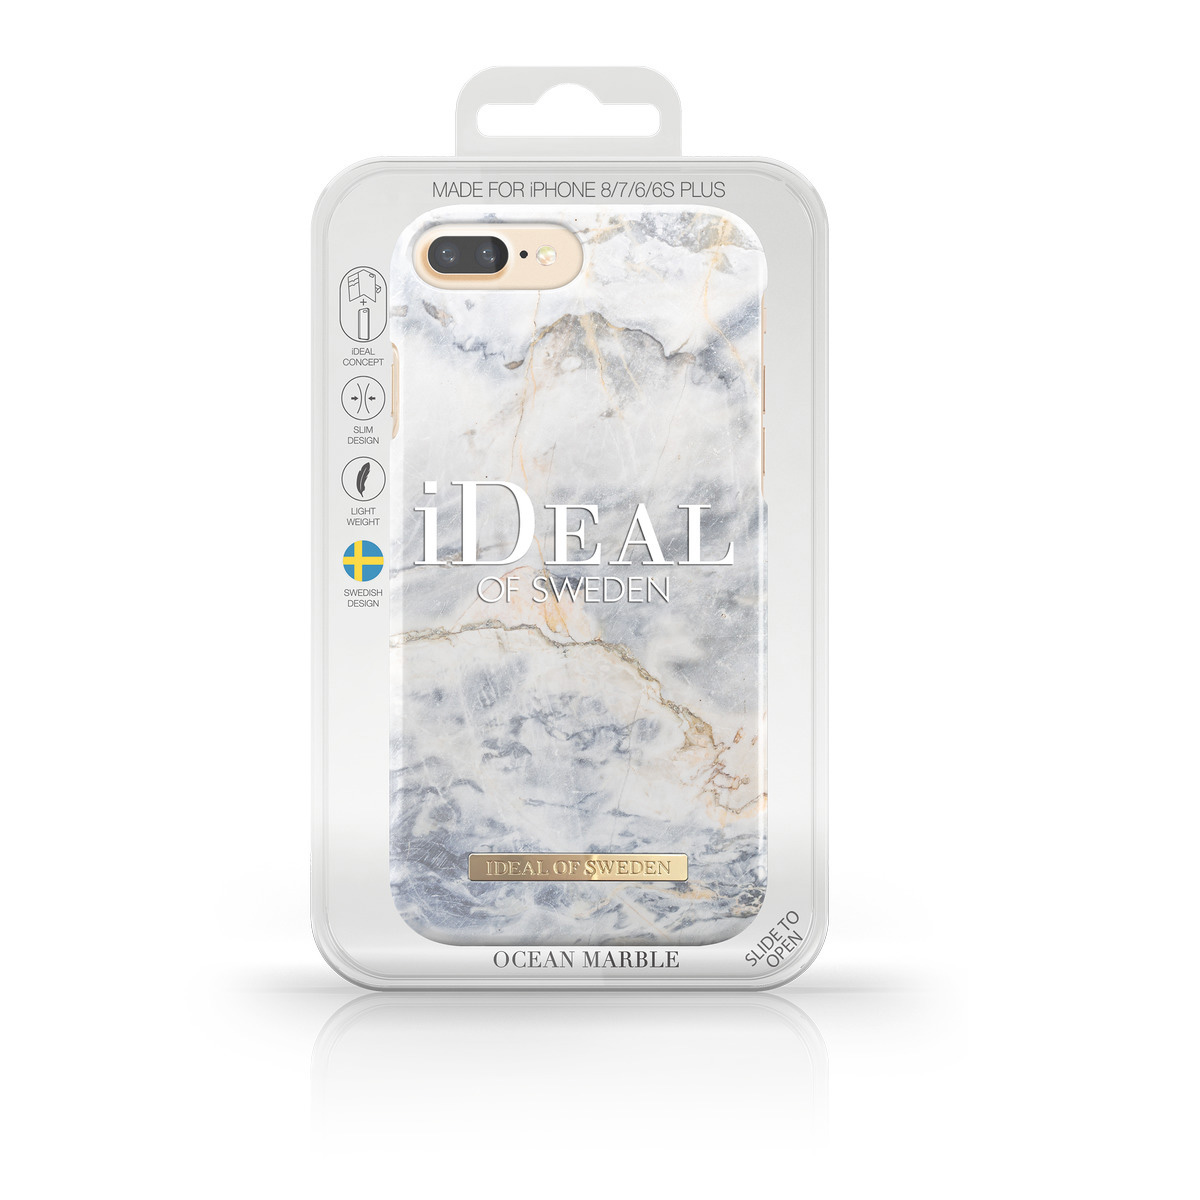 SWEDEN iPhone Ocean Plus 6 IDEAL ,iPhone Plus, iPhone 8 Marble Fashion, Plus, Backcover, Apple, OF 7